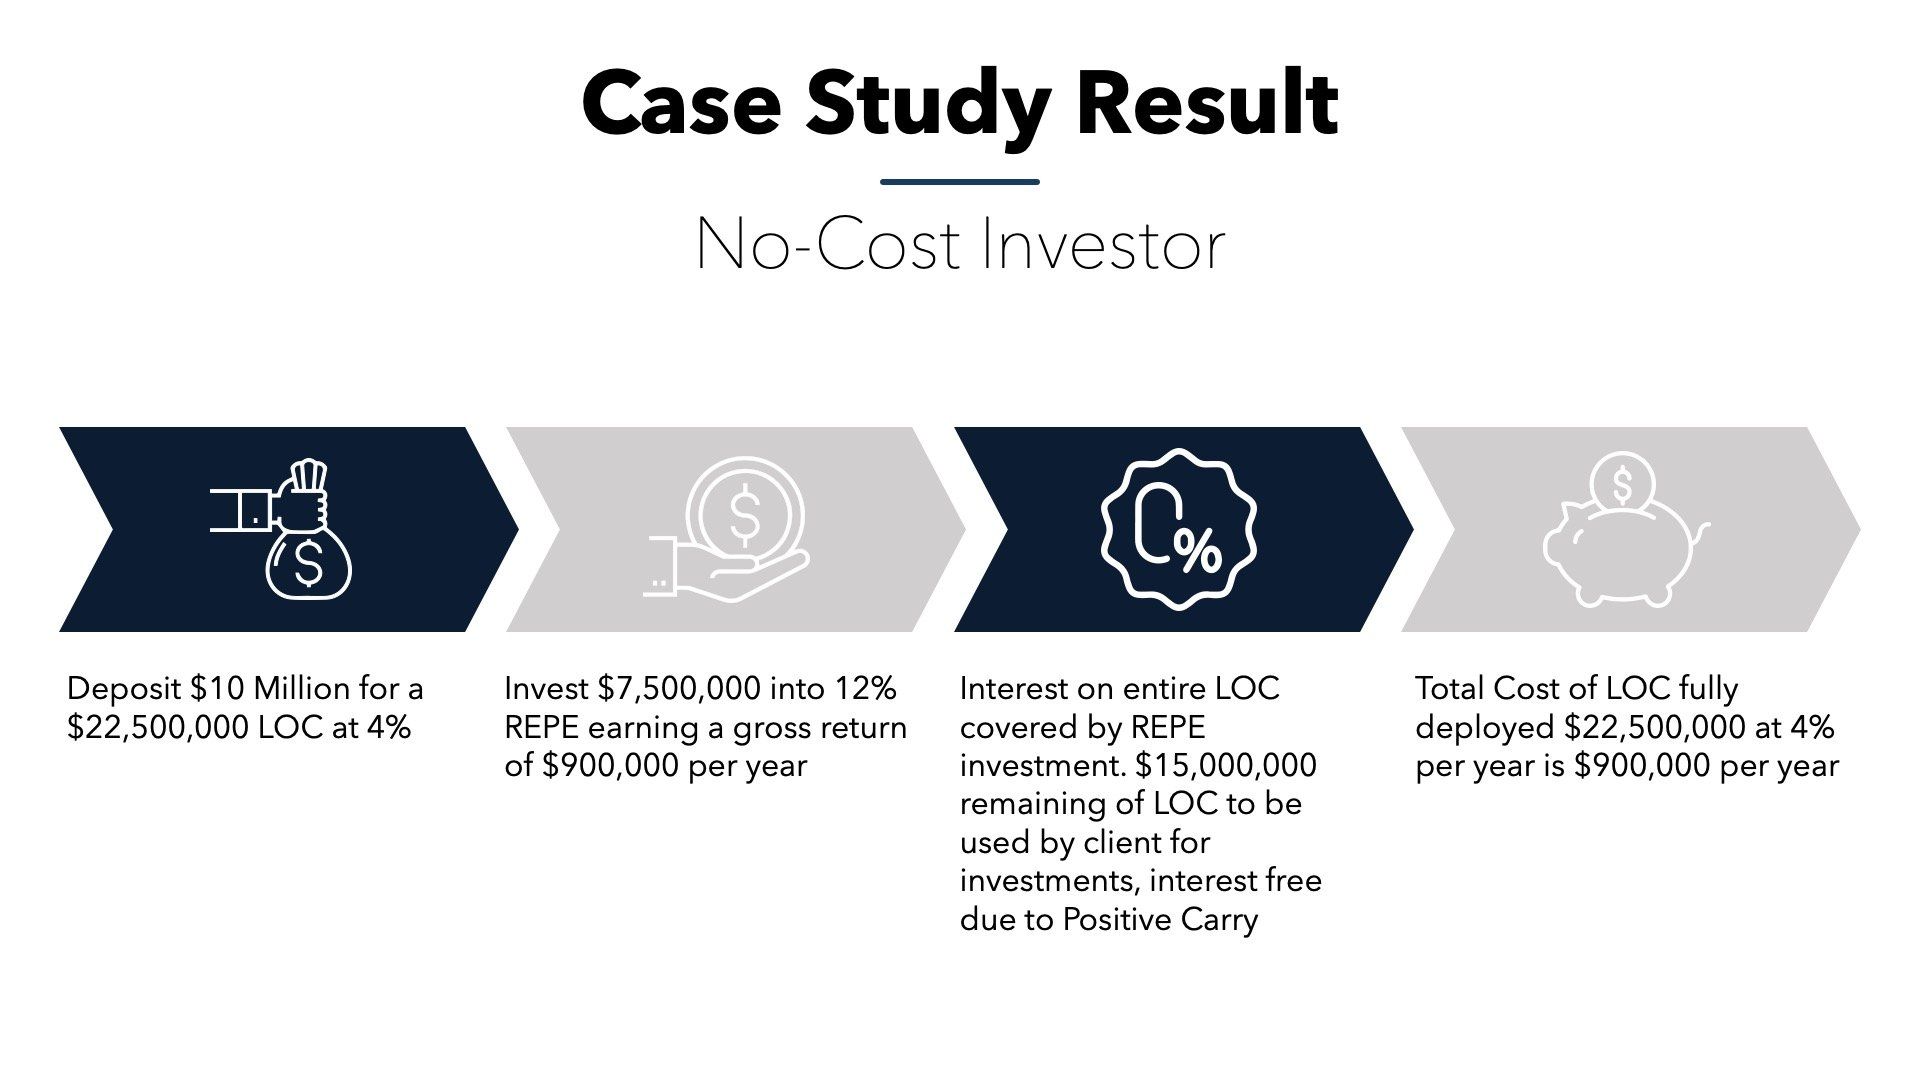 a case study result for a no-cost investor .